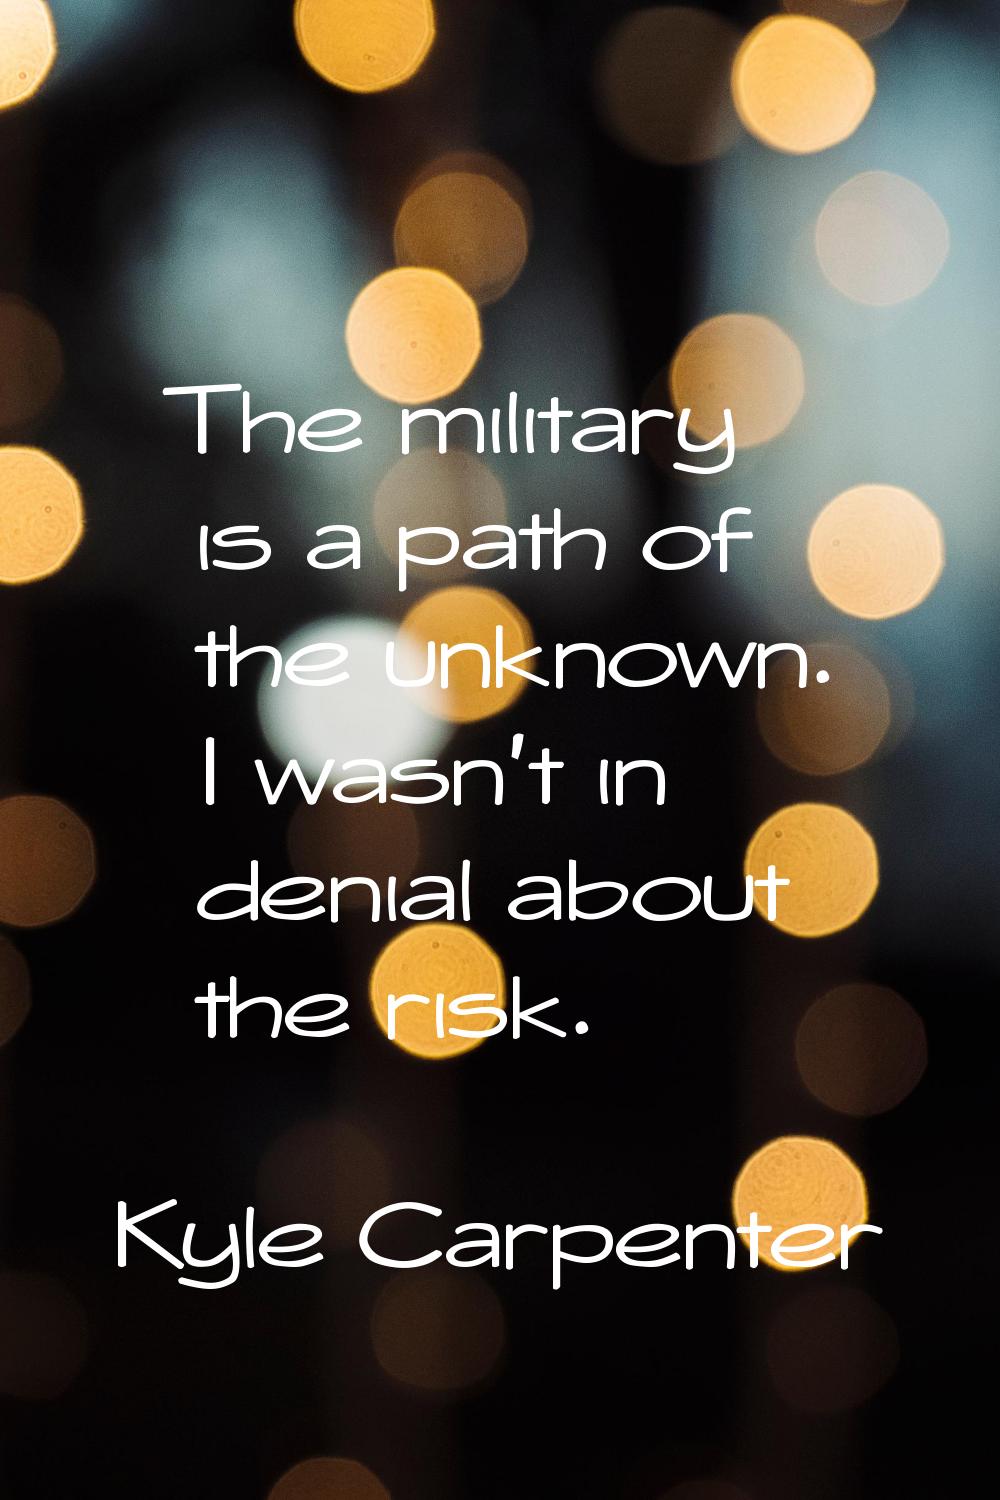 The military is a path of the unknown. I wasn't in denial about the risk.